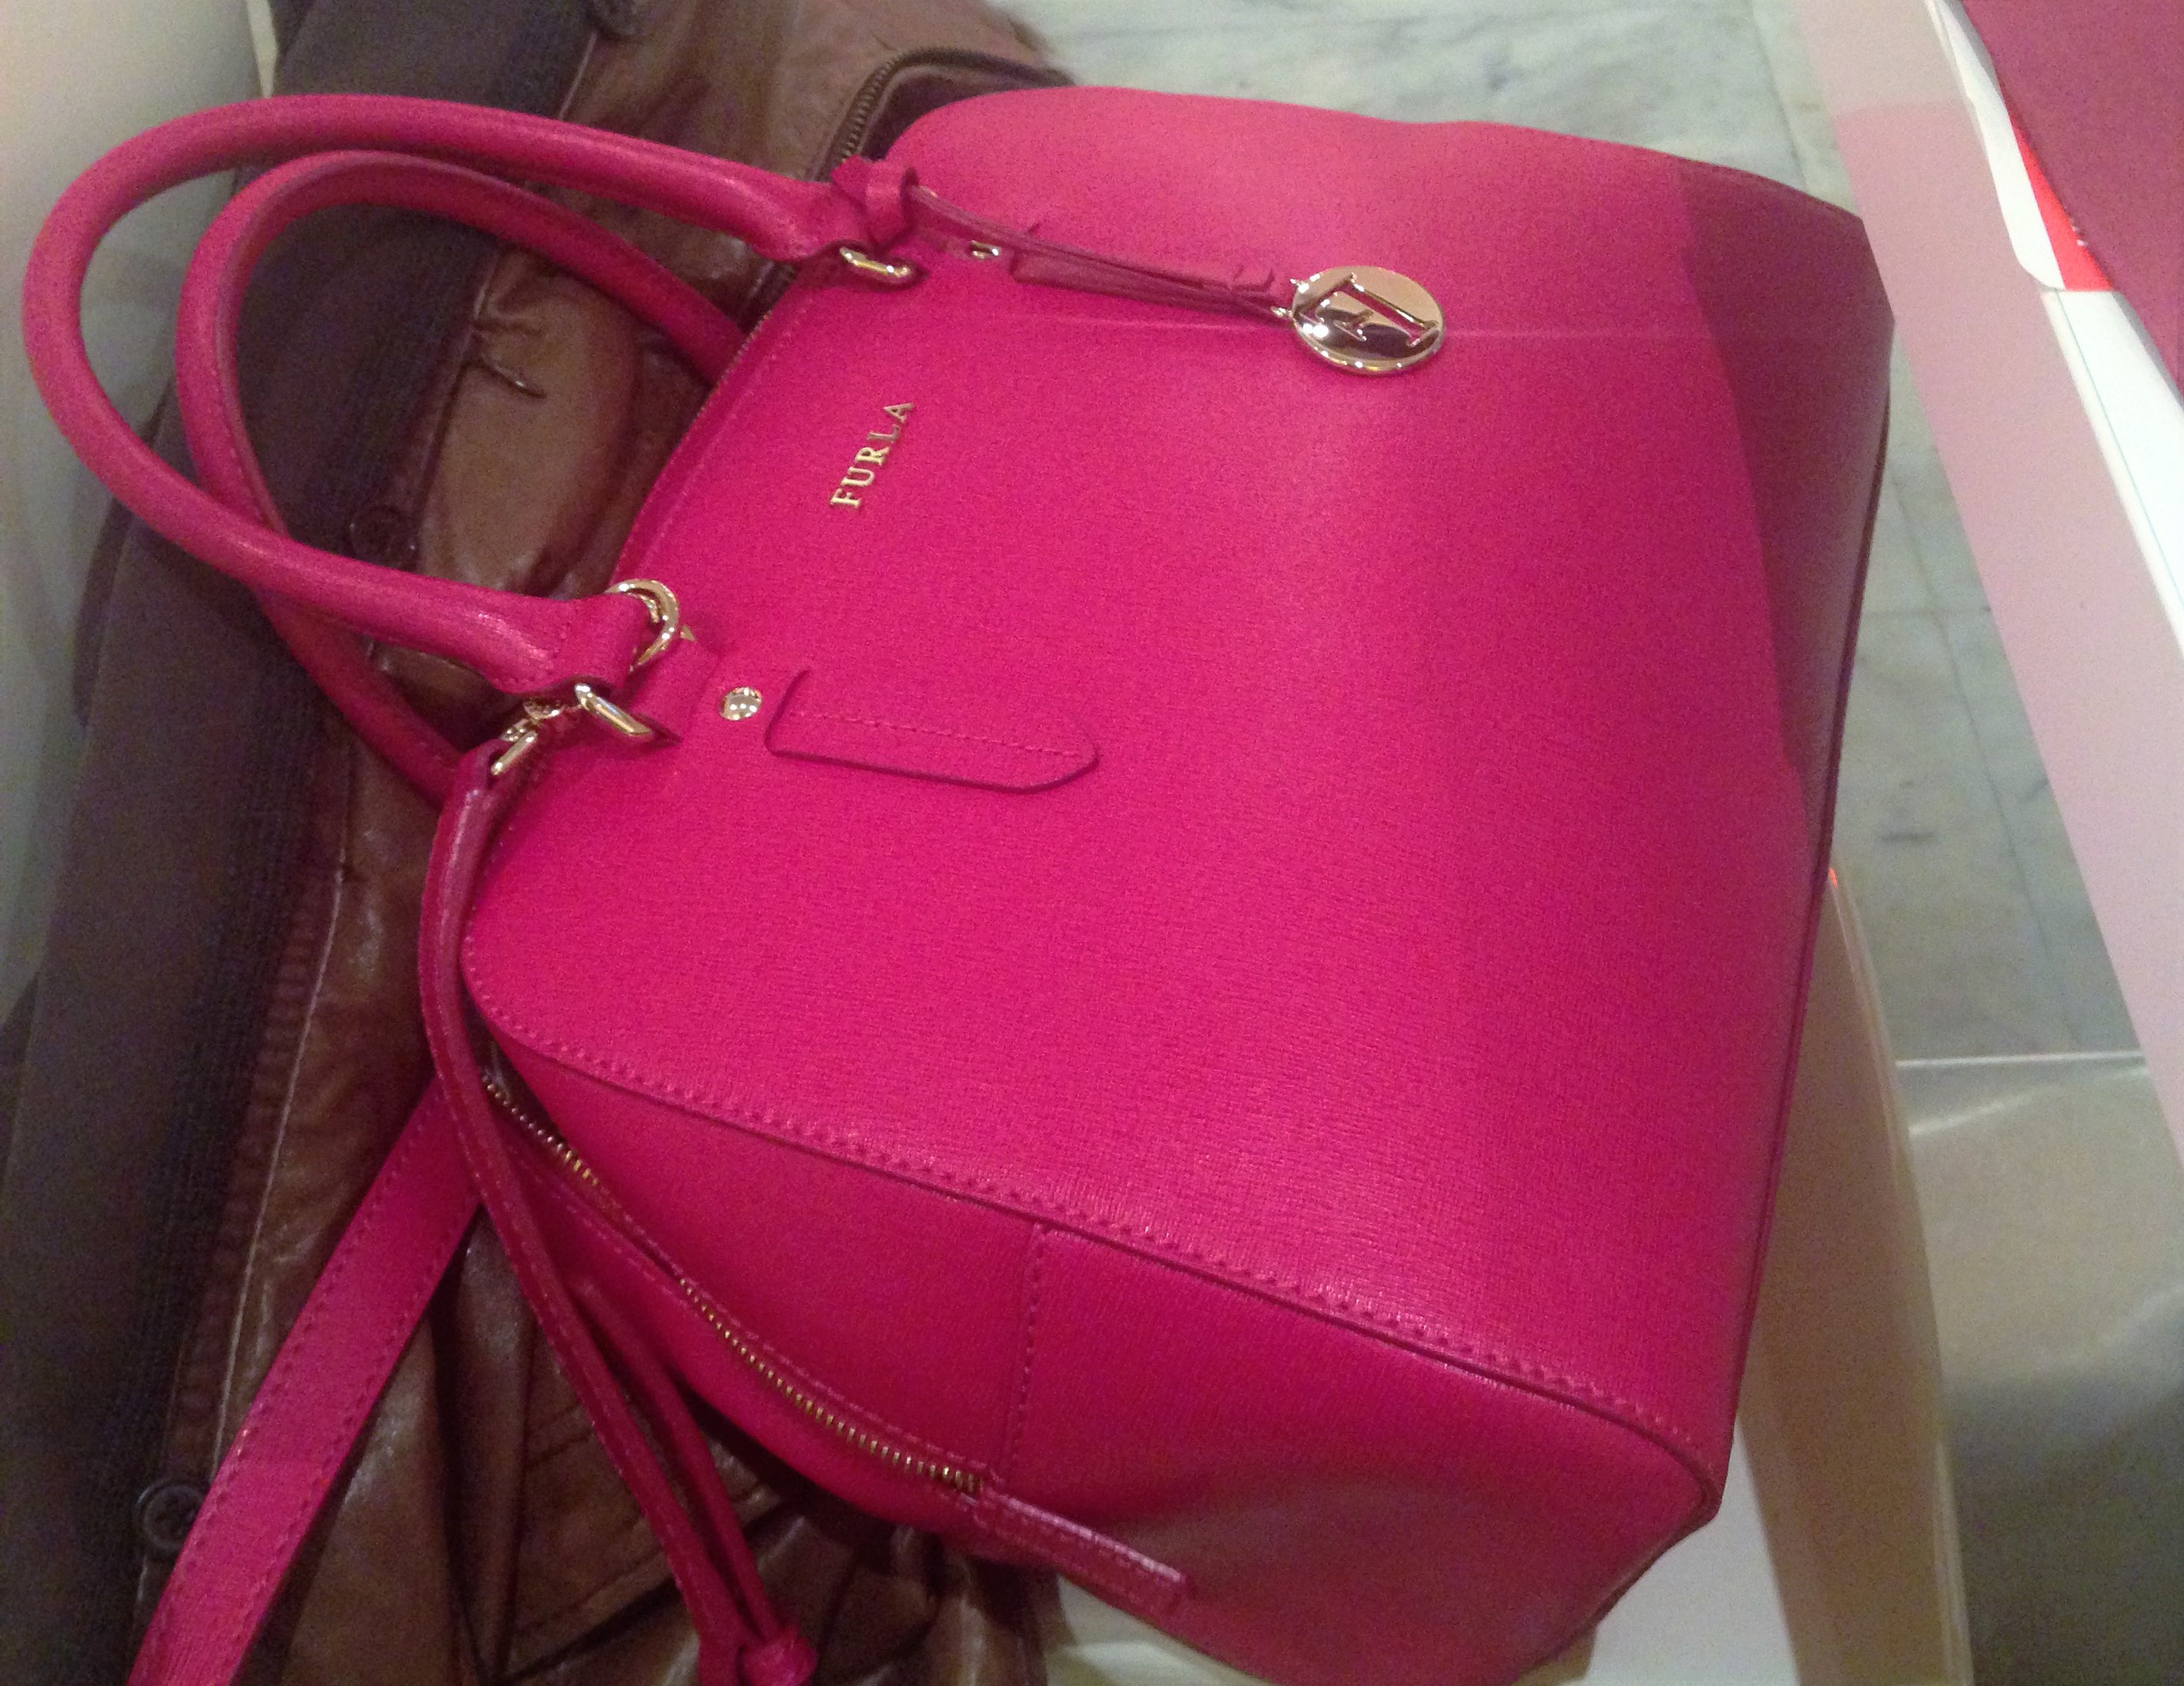 Fucsia is the new black - outlet di Furla